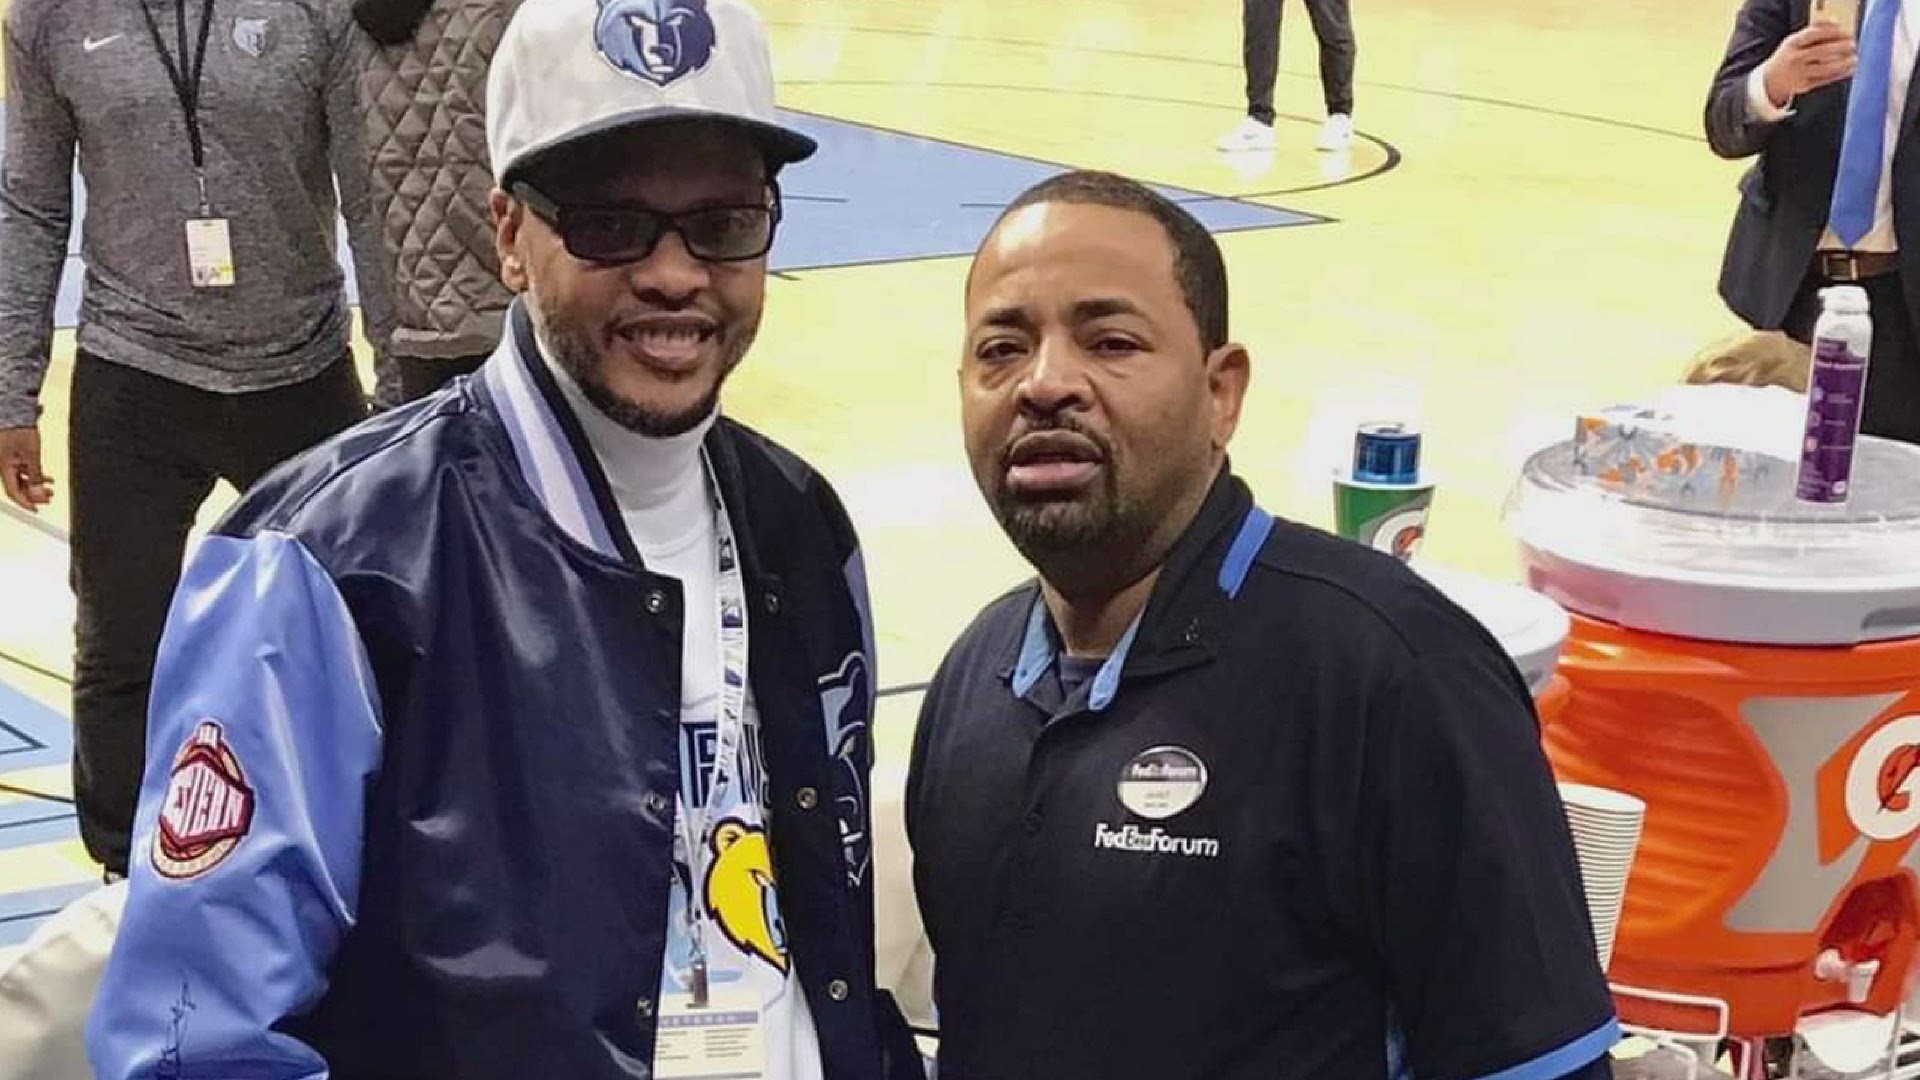 Robert Pera, Marc Gasol, Mike Conley, Ja Morant and many others have donated to a GoFundMe for longtime usher LaVelt Hill, who is battling renal failure